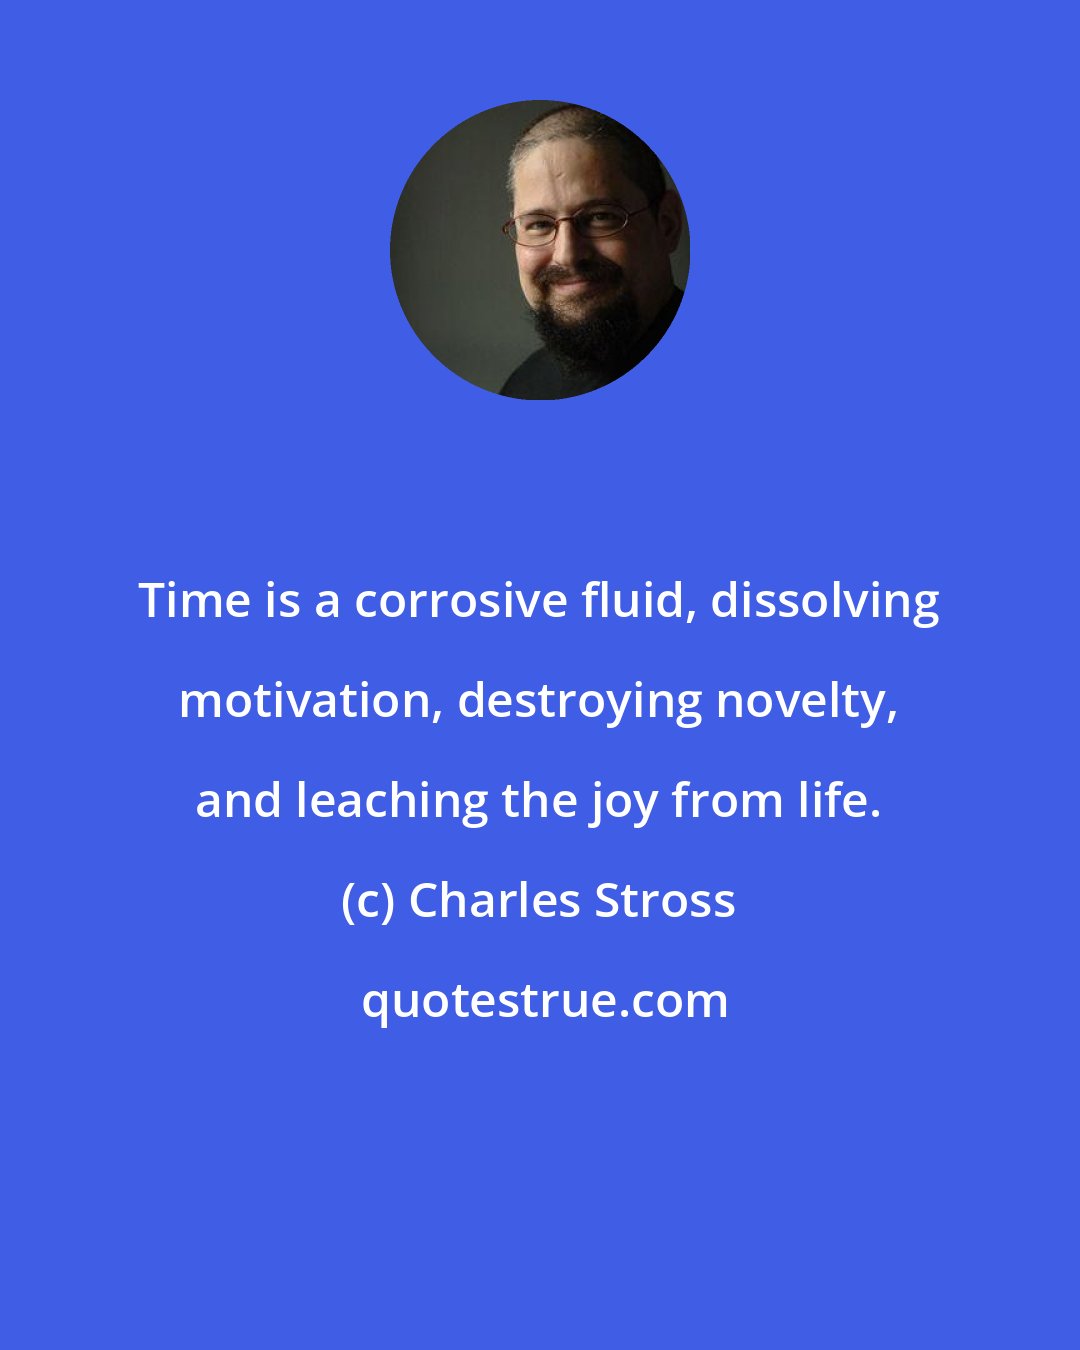 Charles Stross: Time is a corrosive fluid, dissolving motivation, destroying novelty, and leaching the joy from life.